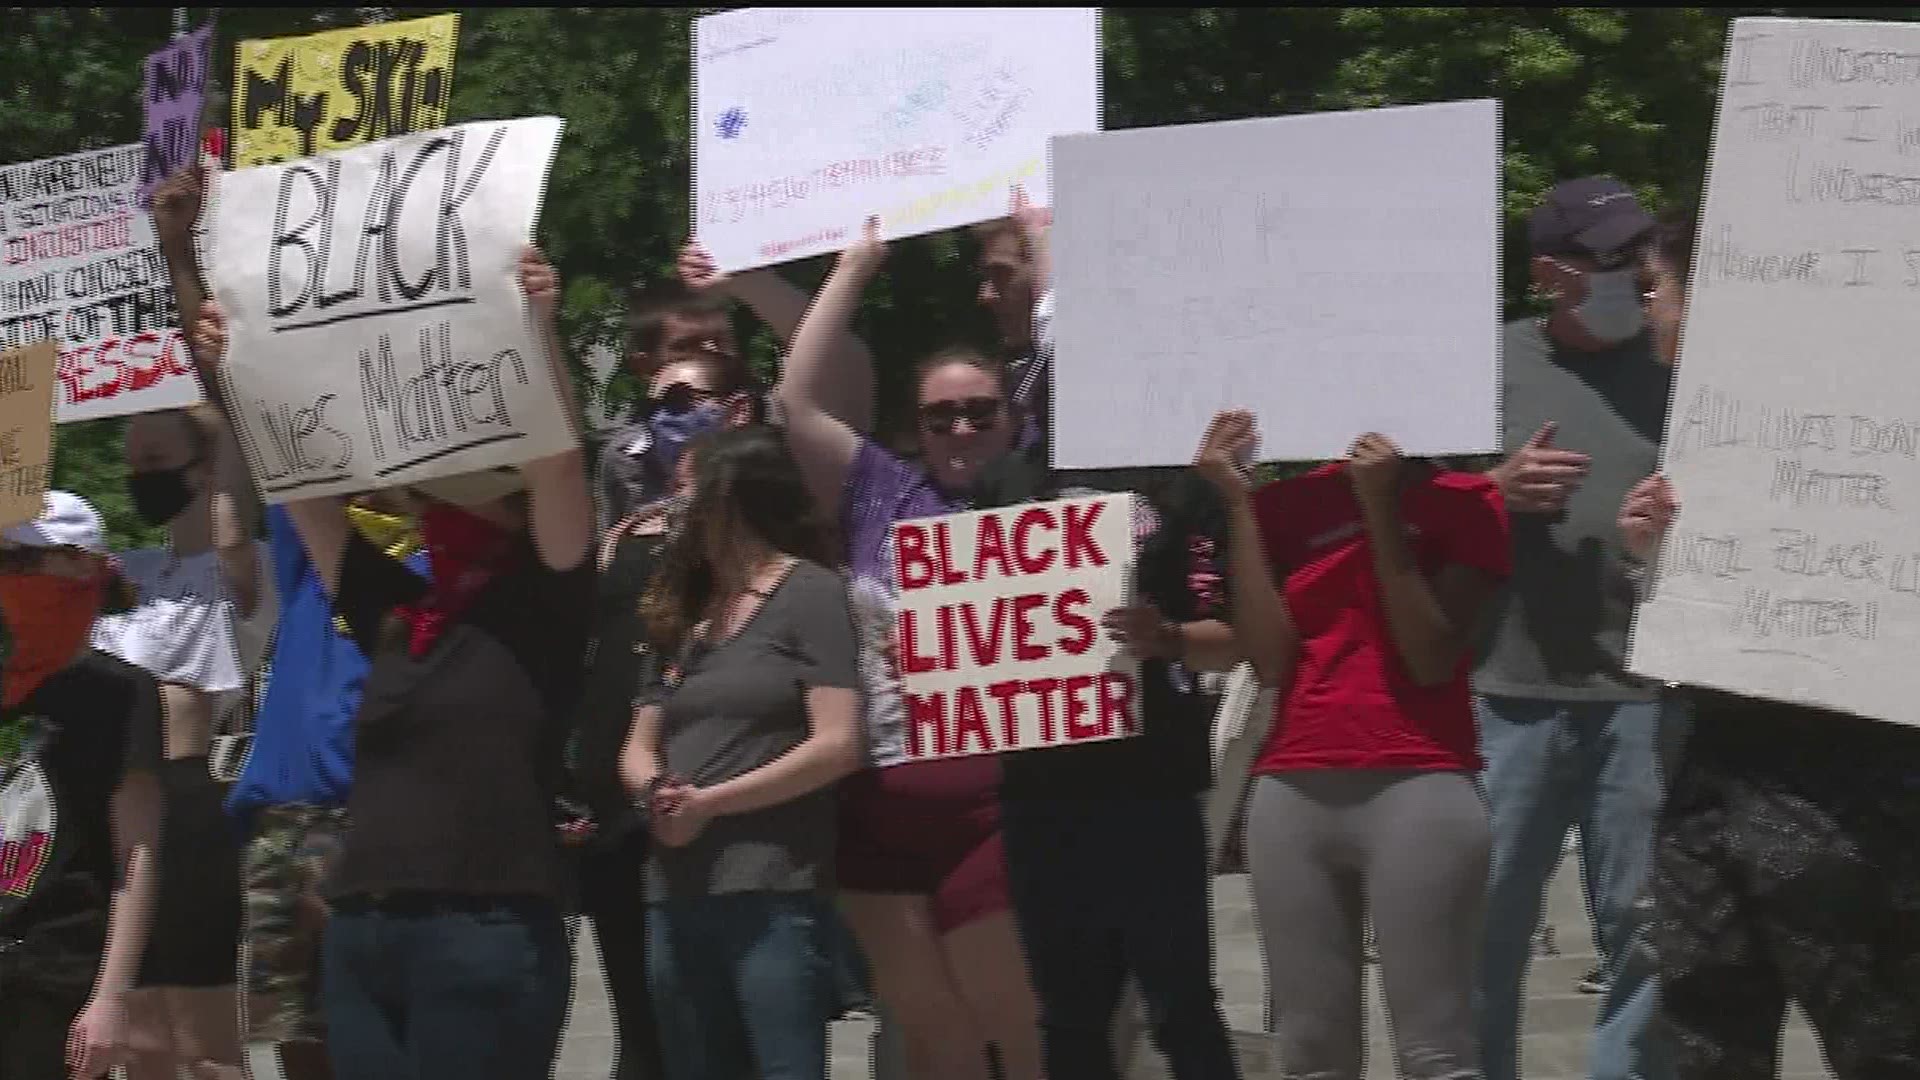 Protests in Harrisburg continued into a second day on Sunday, just hours after the city lifted an overnight curfew due to a violent end to Saturday’s rally.